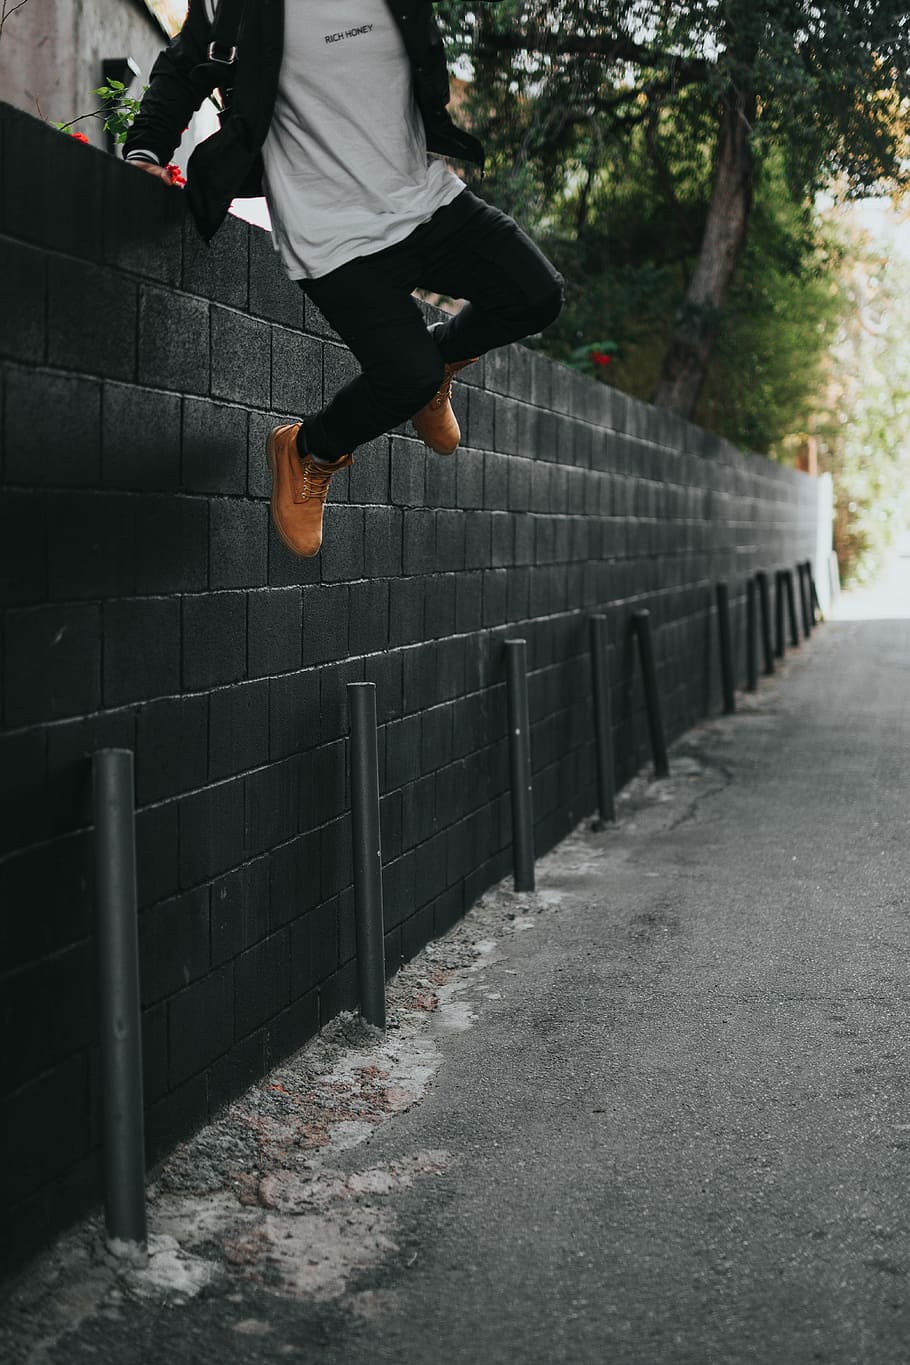 HD wallpaper: man jumping over fence, man jumping on black concrete fence, wall | Wallpaper Flare